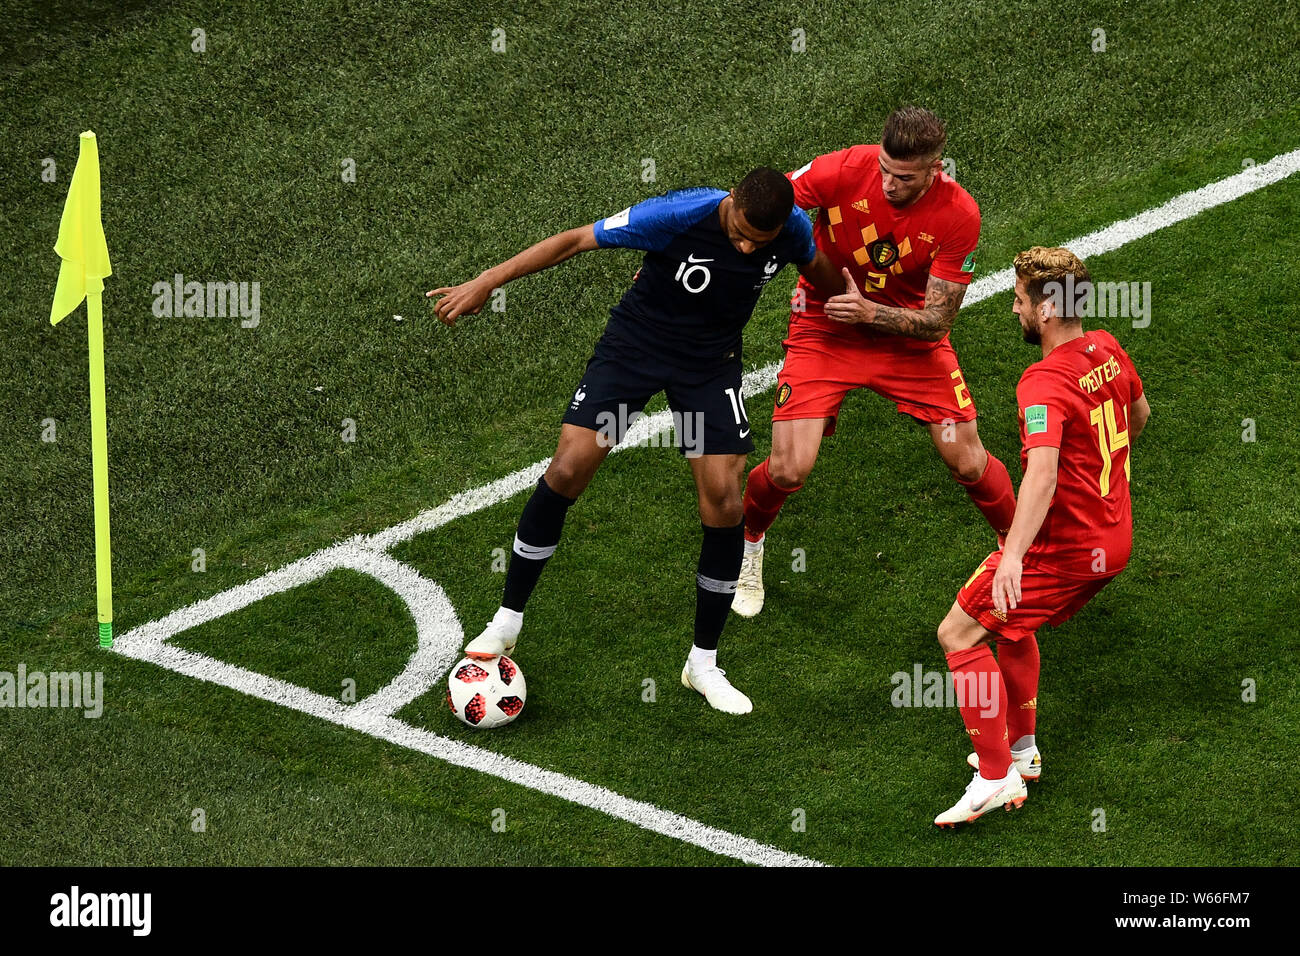 Kylian Mbappe of France, left, challenges Toby Alderweireld, center, and Dries Mertens of Belgium in their semifinal match during the 2018 FIFA World Stock Photo